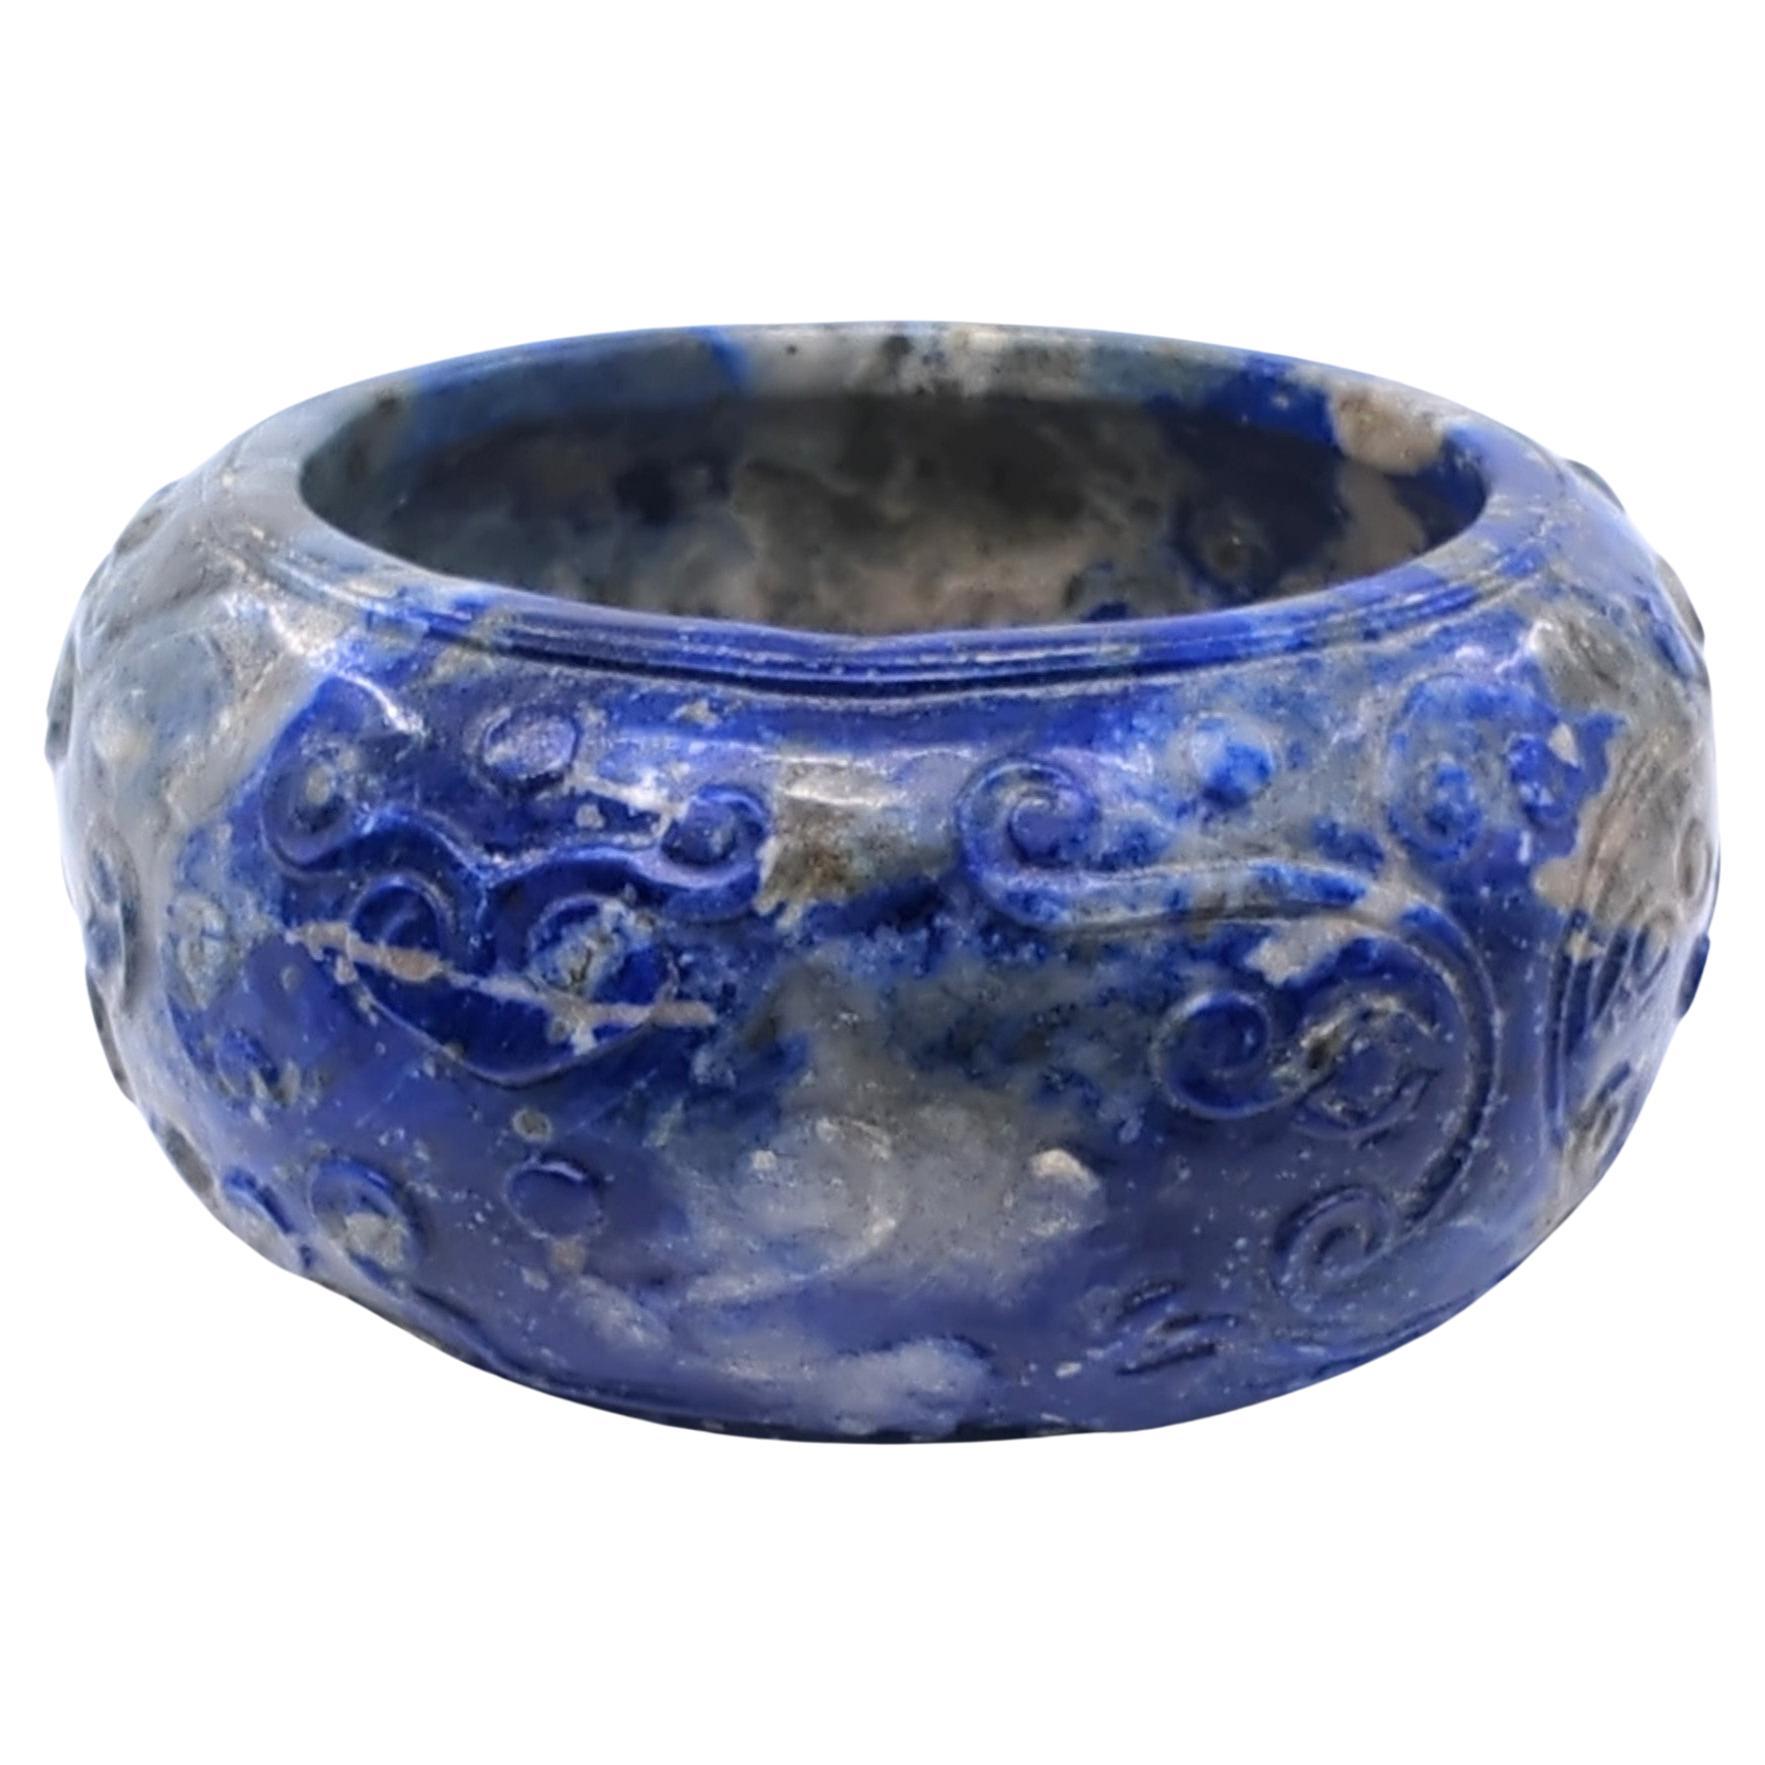 This antique hand-carved sodalite hardstone brush washer is a stunning example of traditional craftsmanship and artistic expression. The washer is of a compressed barrel form, a shape that is both elegant and functional, making it a suitable and